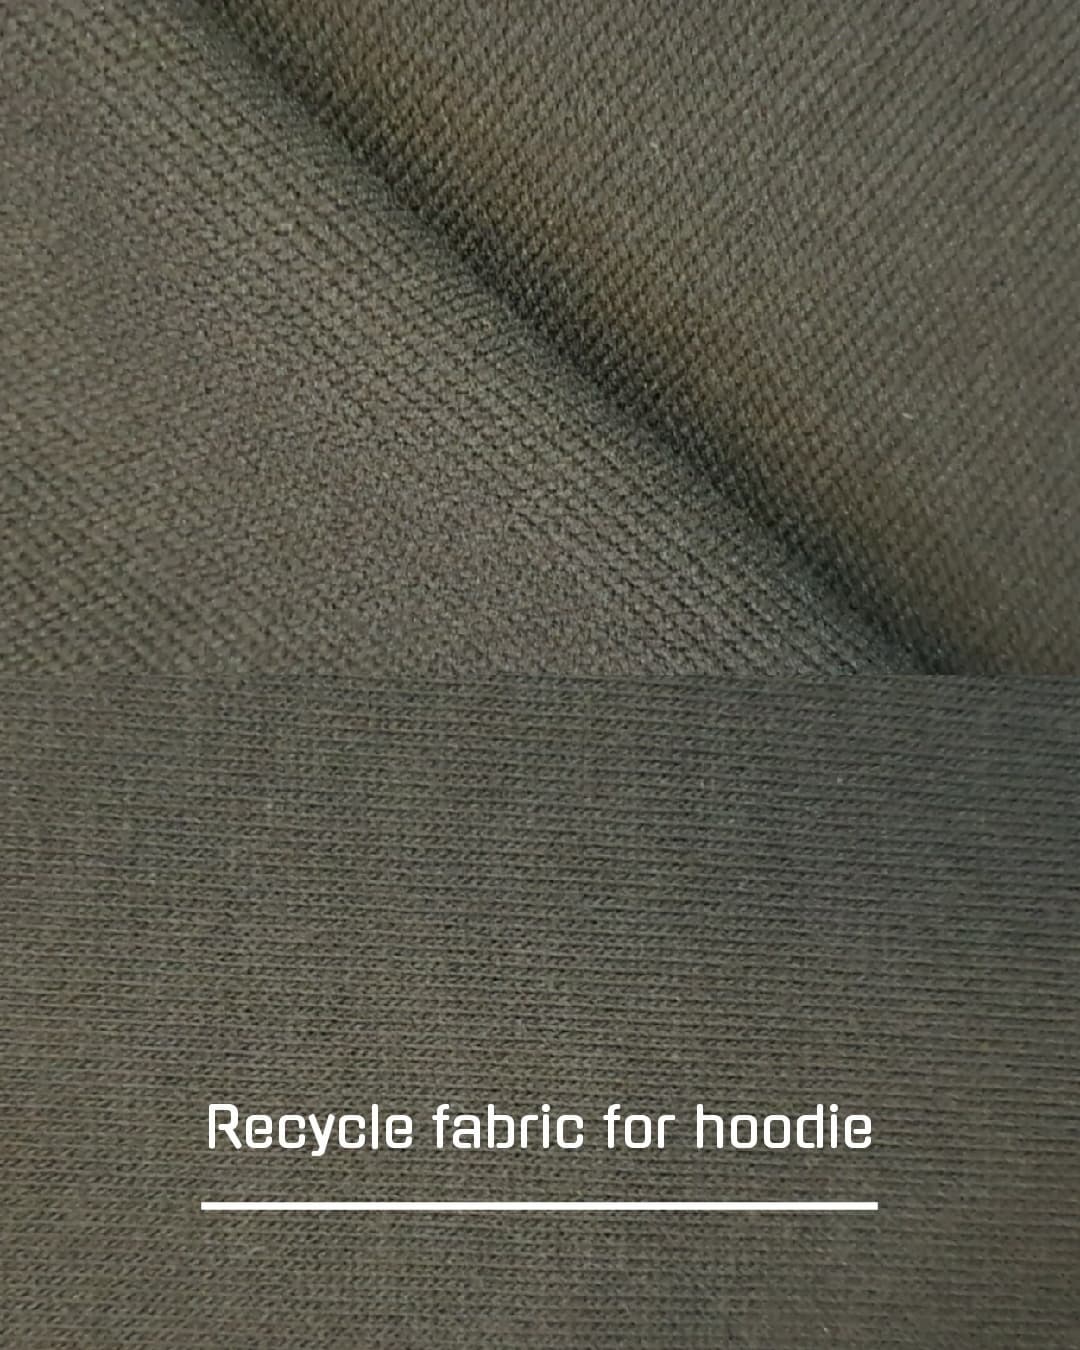 Recycled fabric for hoodie and sweatshirt_